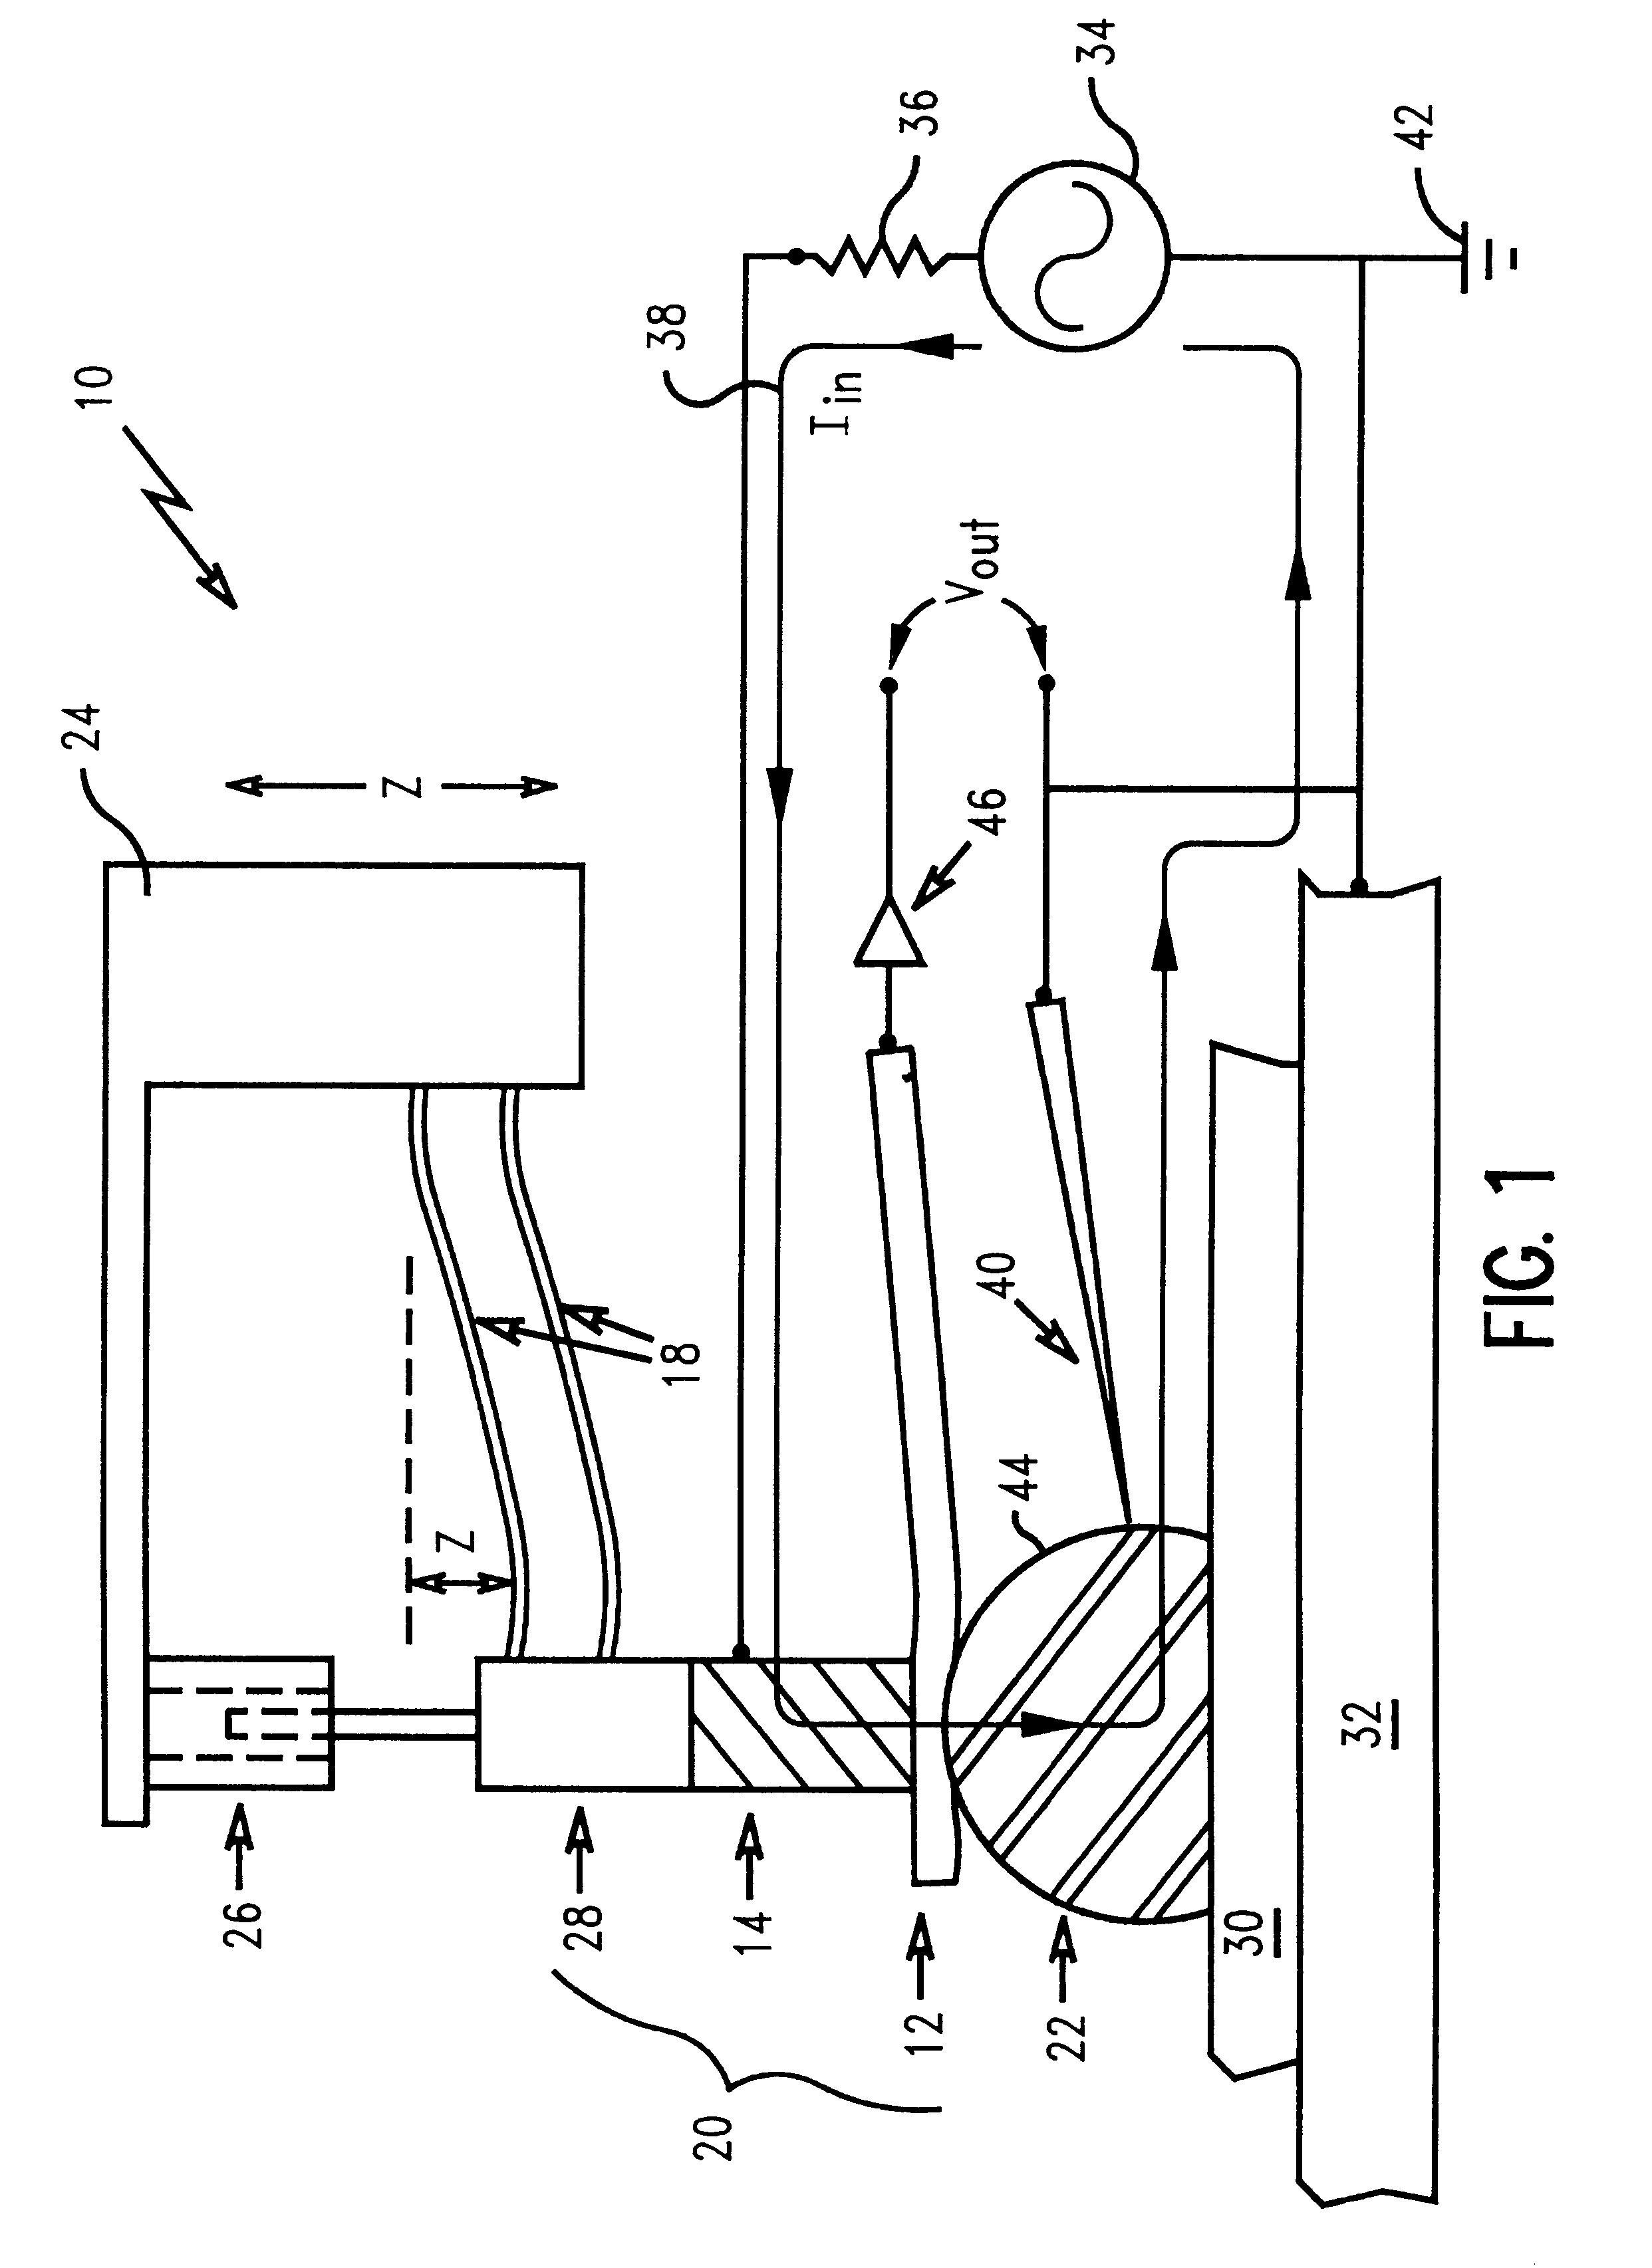 Method of measuring oxide thickness during semiconductor fabrication